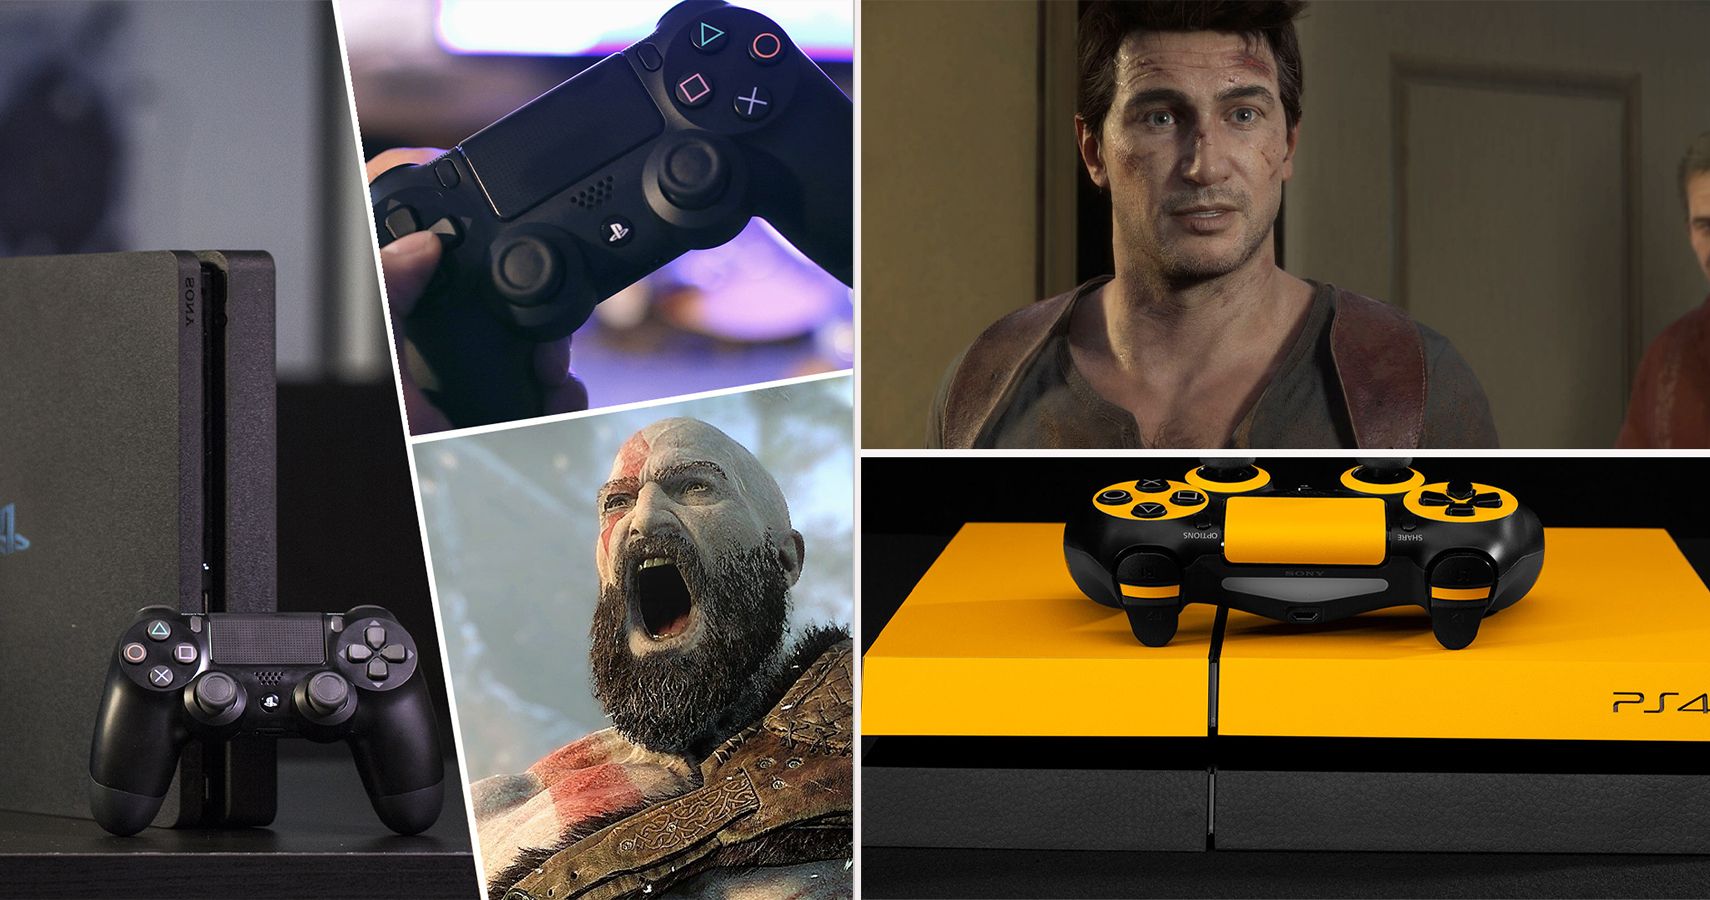 21 awesome PS4 tips, tricks and hidden features